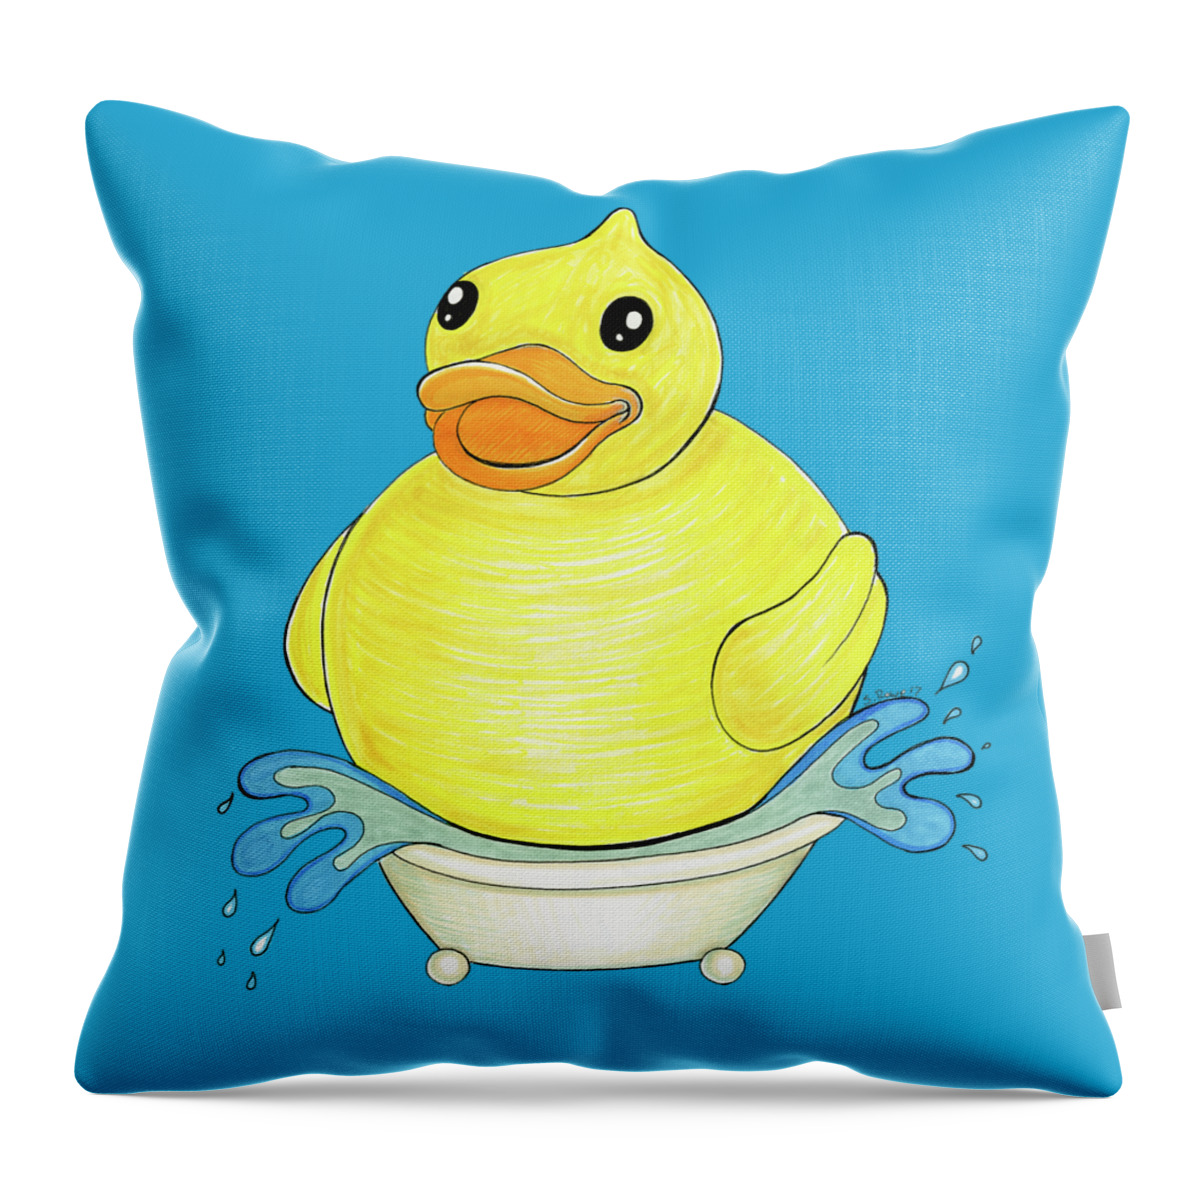 Big Duck Throw Pillow featuring the drawing Big Happy Rubber Duck by Shawna Rowe